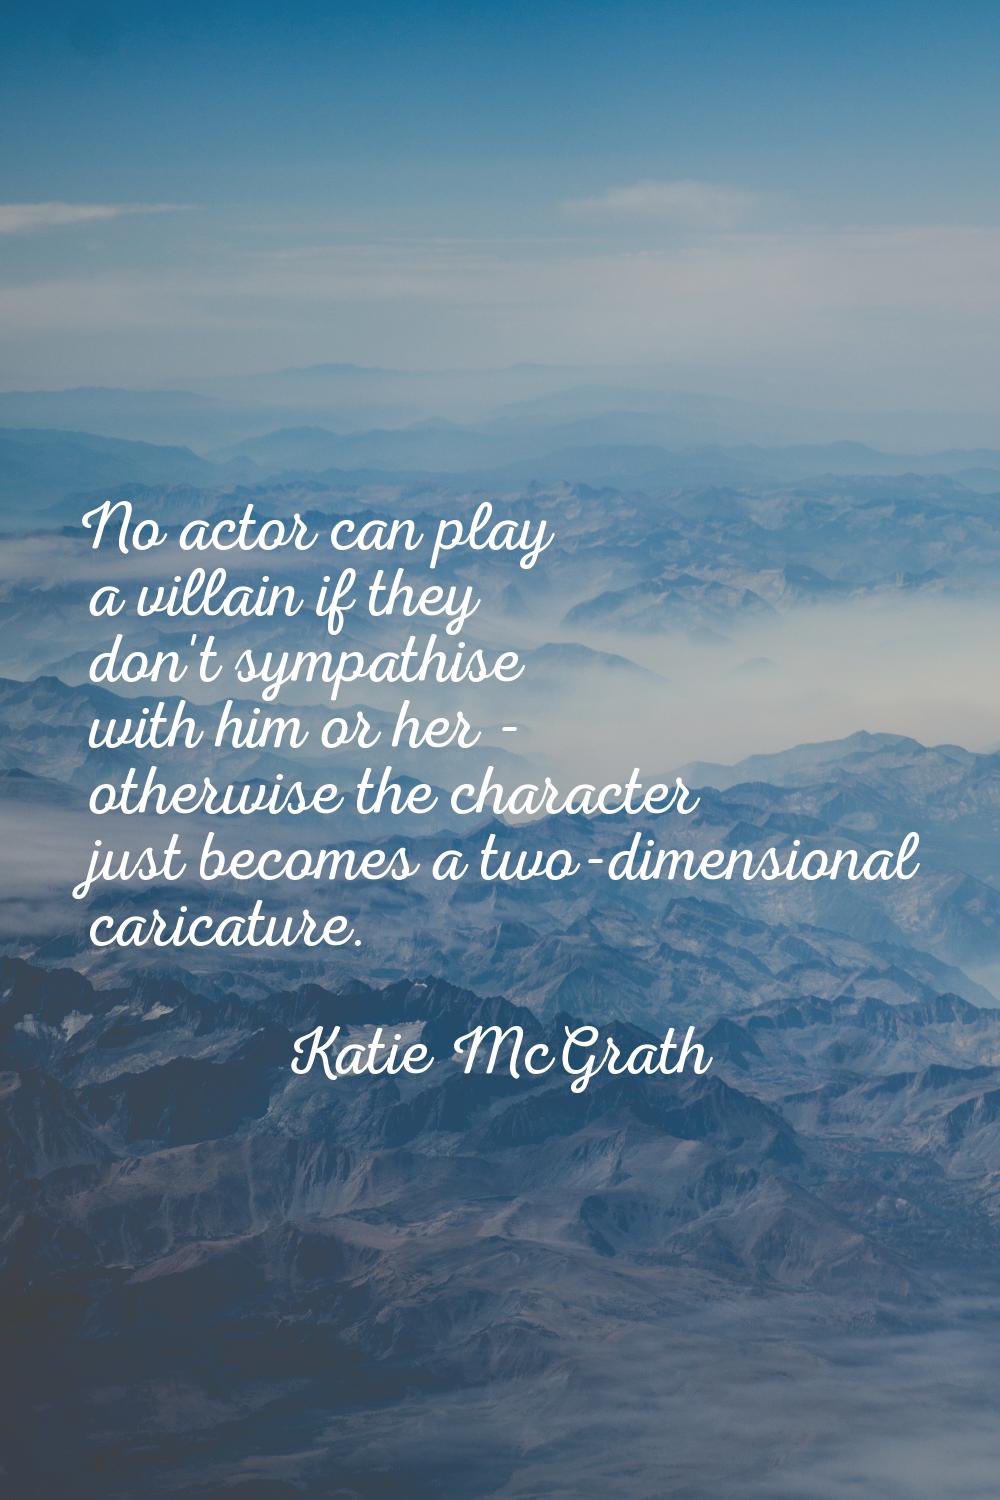 No actor can play a villain if they don't sympathise with him or her - otherwise the character just